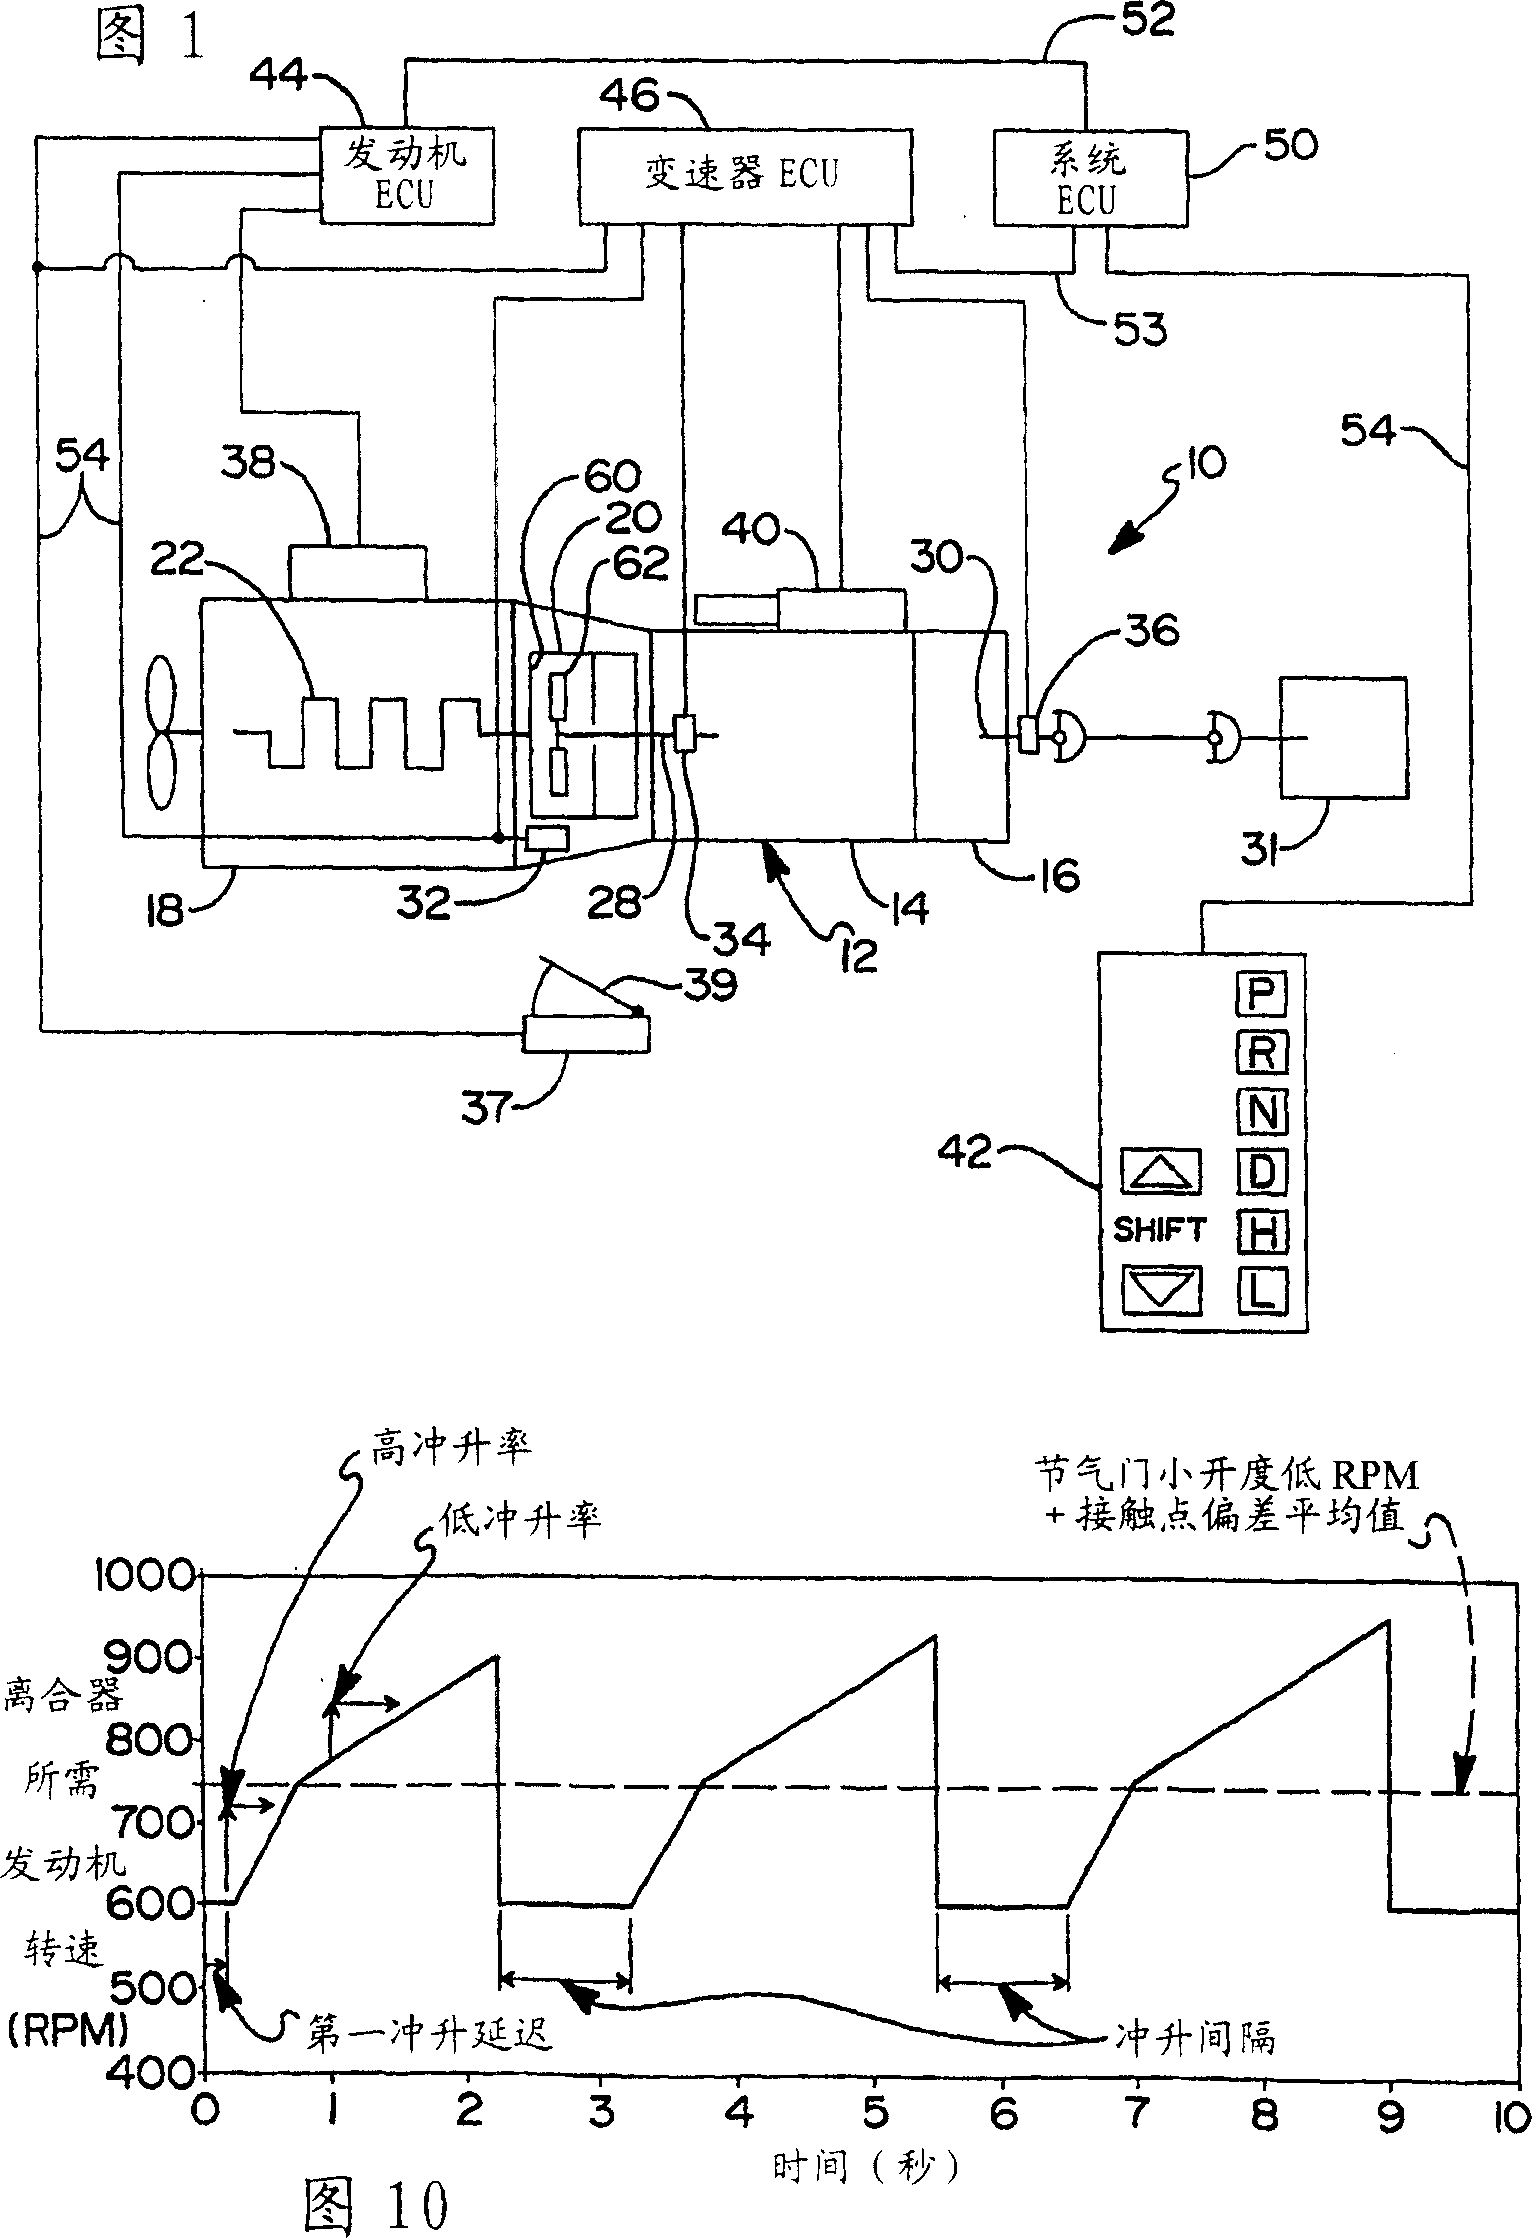 Method and system establishing an engine speed for use by a centrifugal clutch control system to launch a vehicle